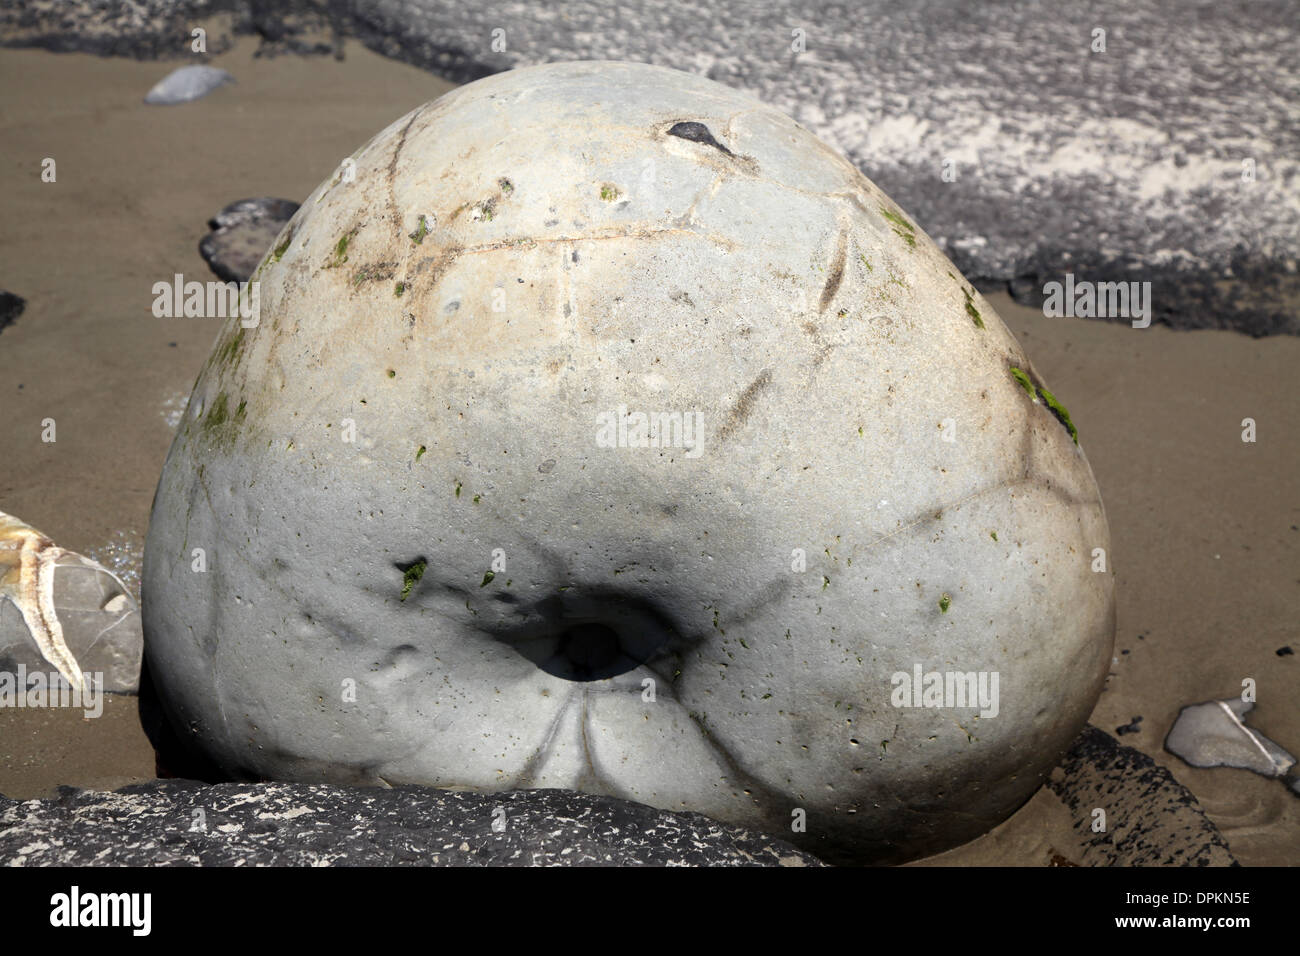 One of the group of geological oddities left on a New Zealand beach, this particular boulder resembles a doughnut Stock Photo